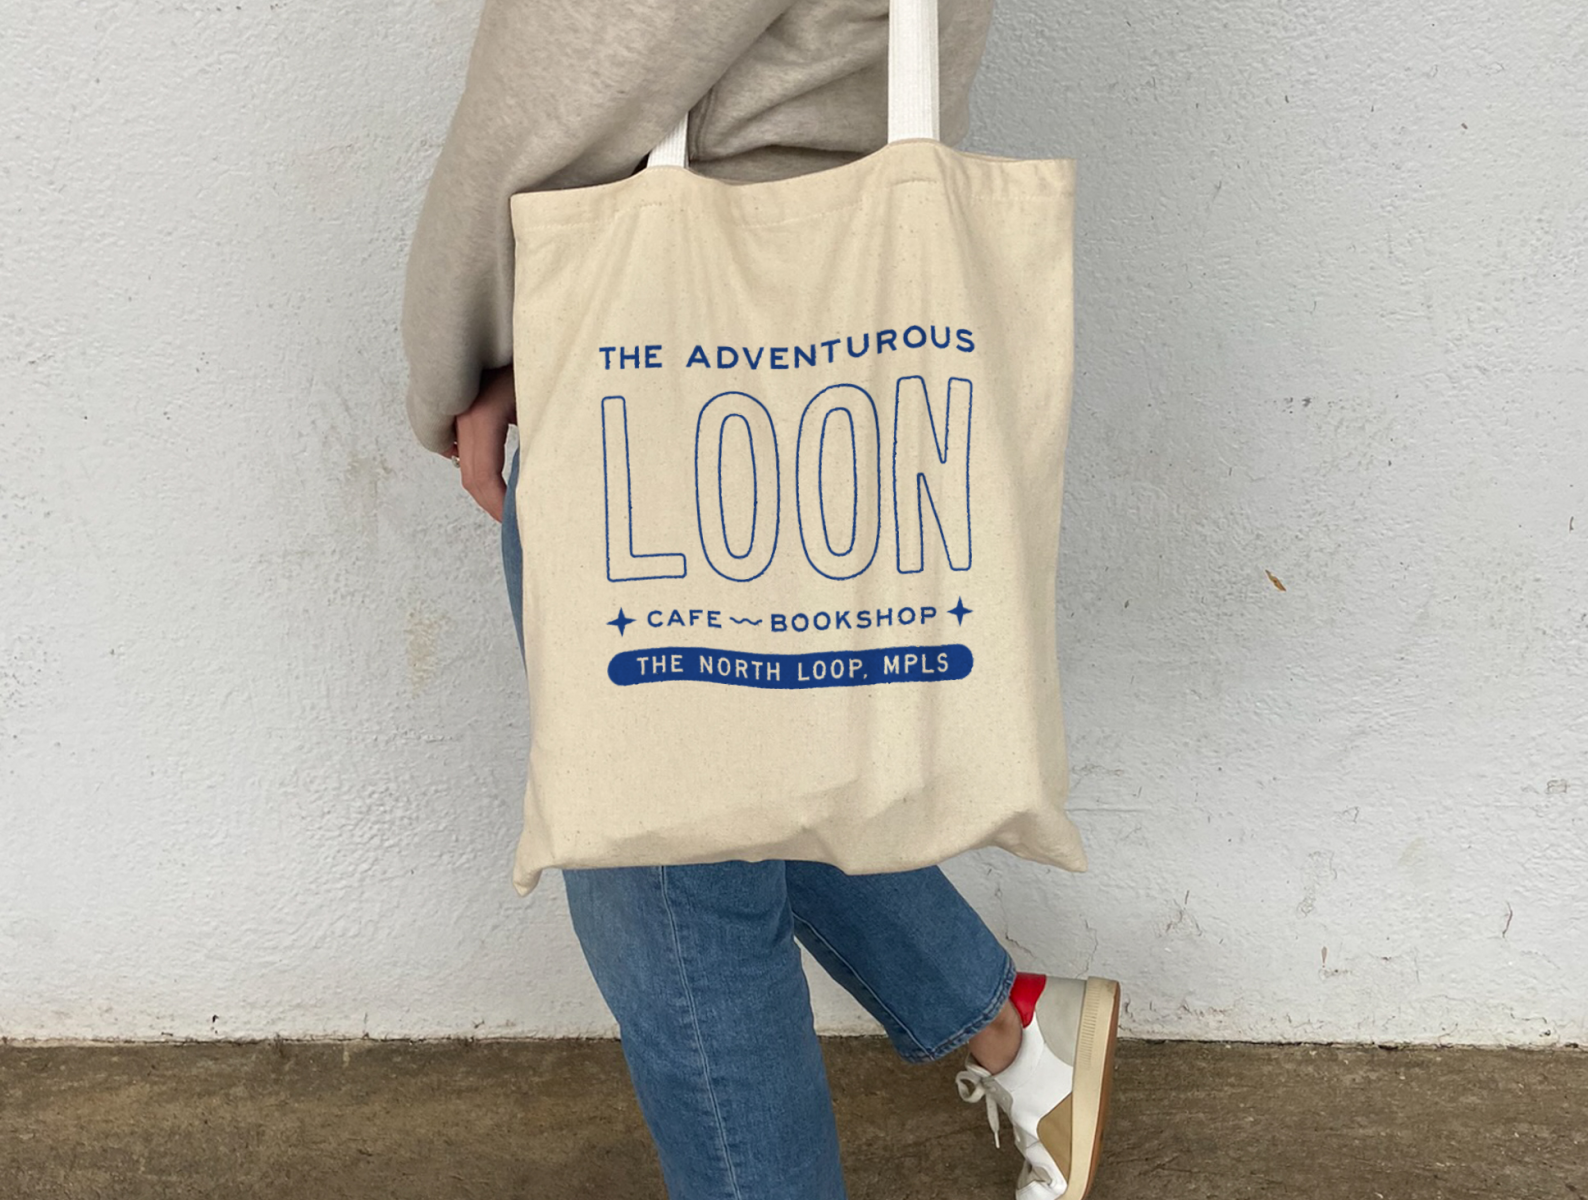 Loon Tote by Lindsey Gatlin on Dribbble